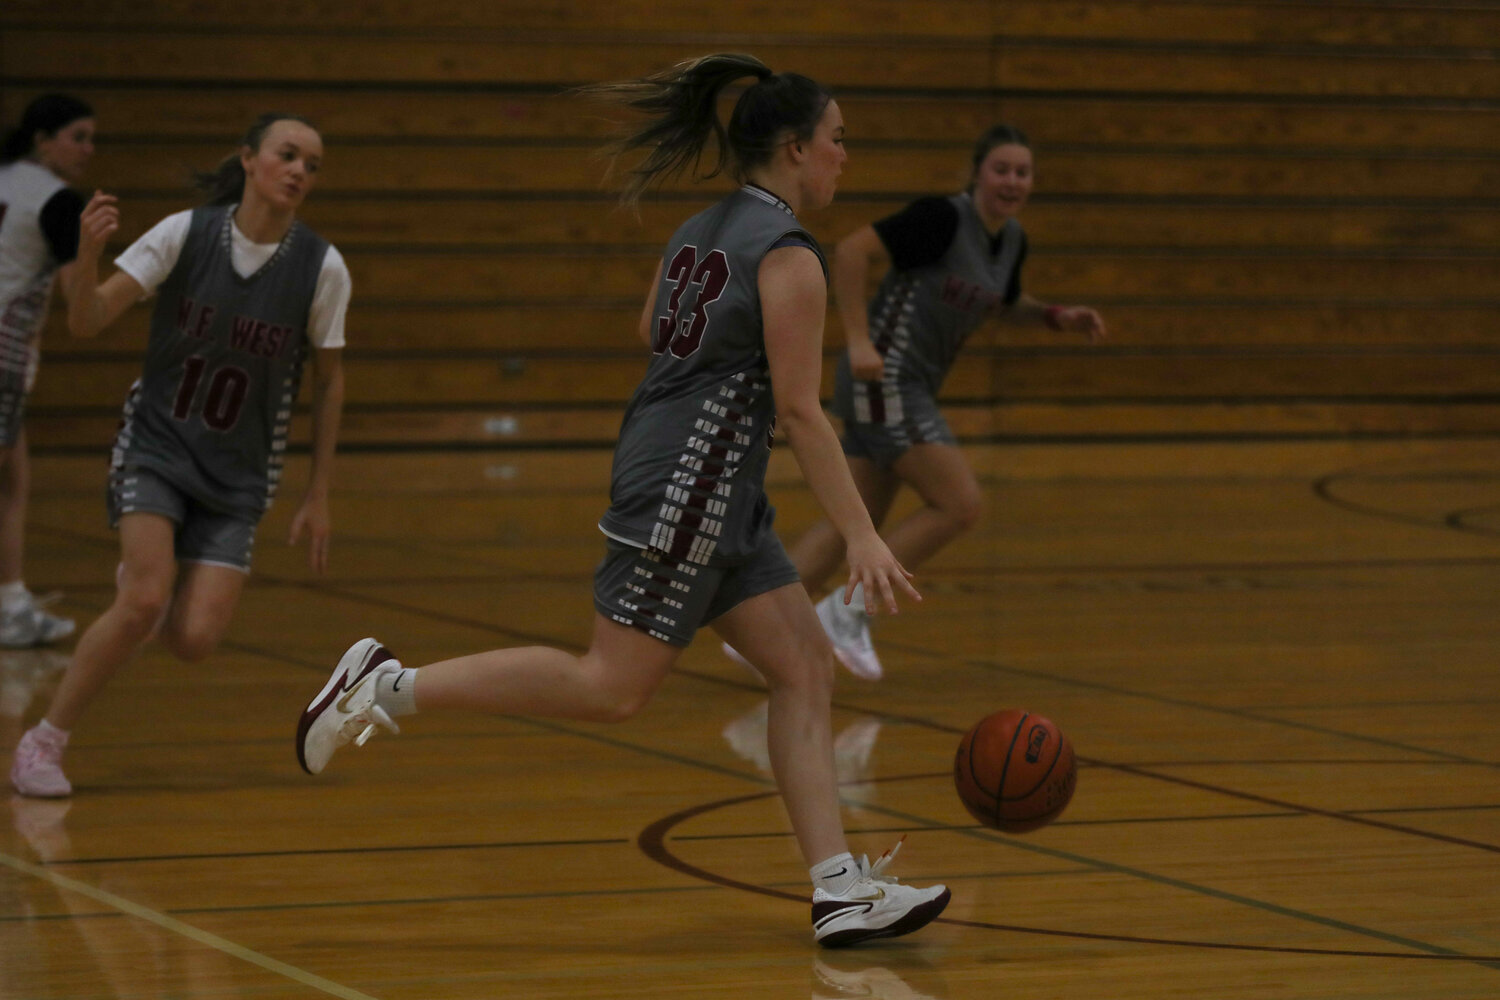 Makenzie Dotson brings the ball up the court during W.F. West's practice on Nov. 21.